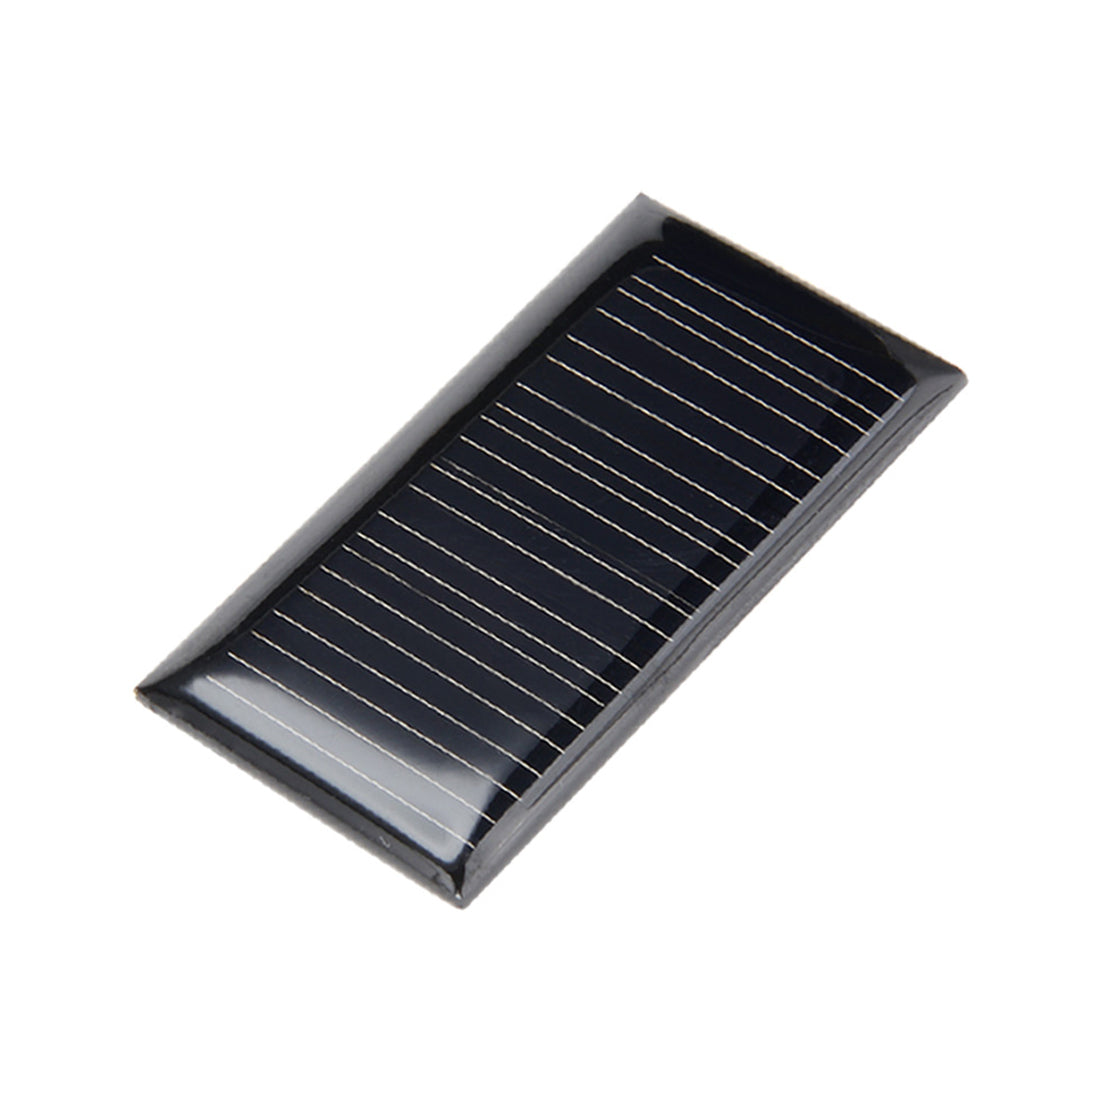 uxcell Uxcell 5Pcs 5V 25mA Poly Mini Solar Cell Panel Module DIY for Phone Light Toys Charger 44mm x 24mm